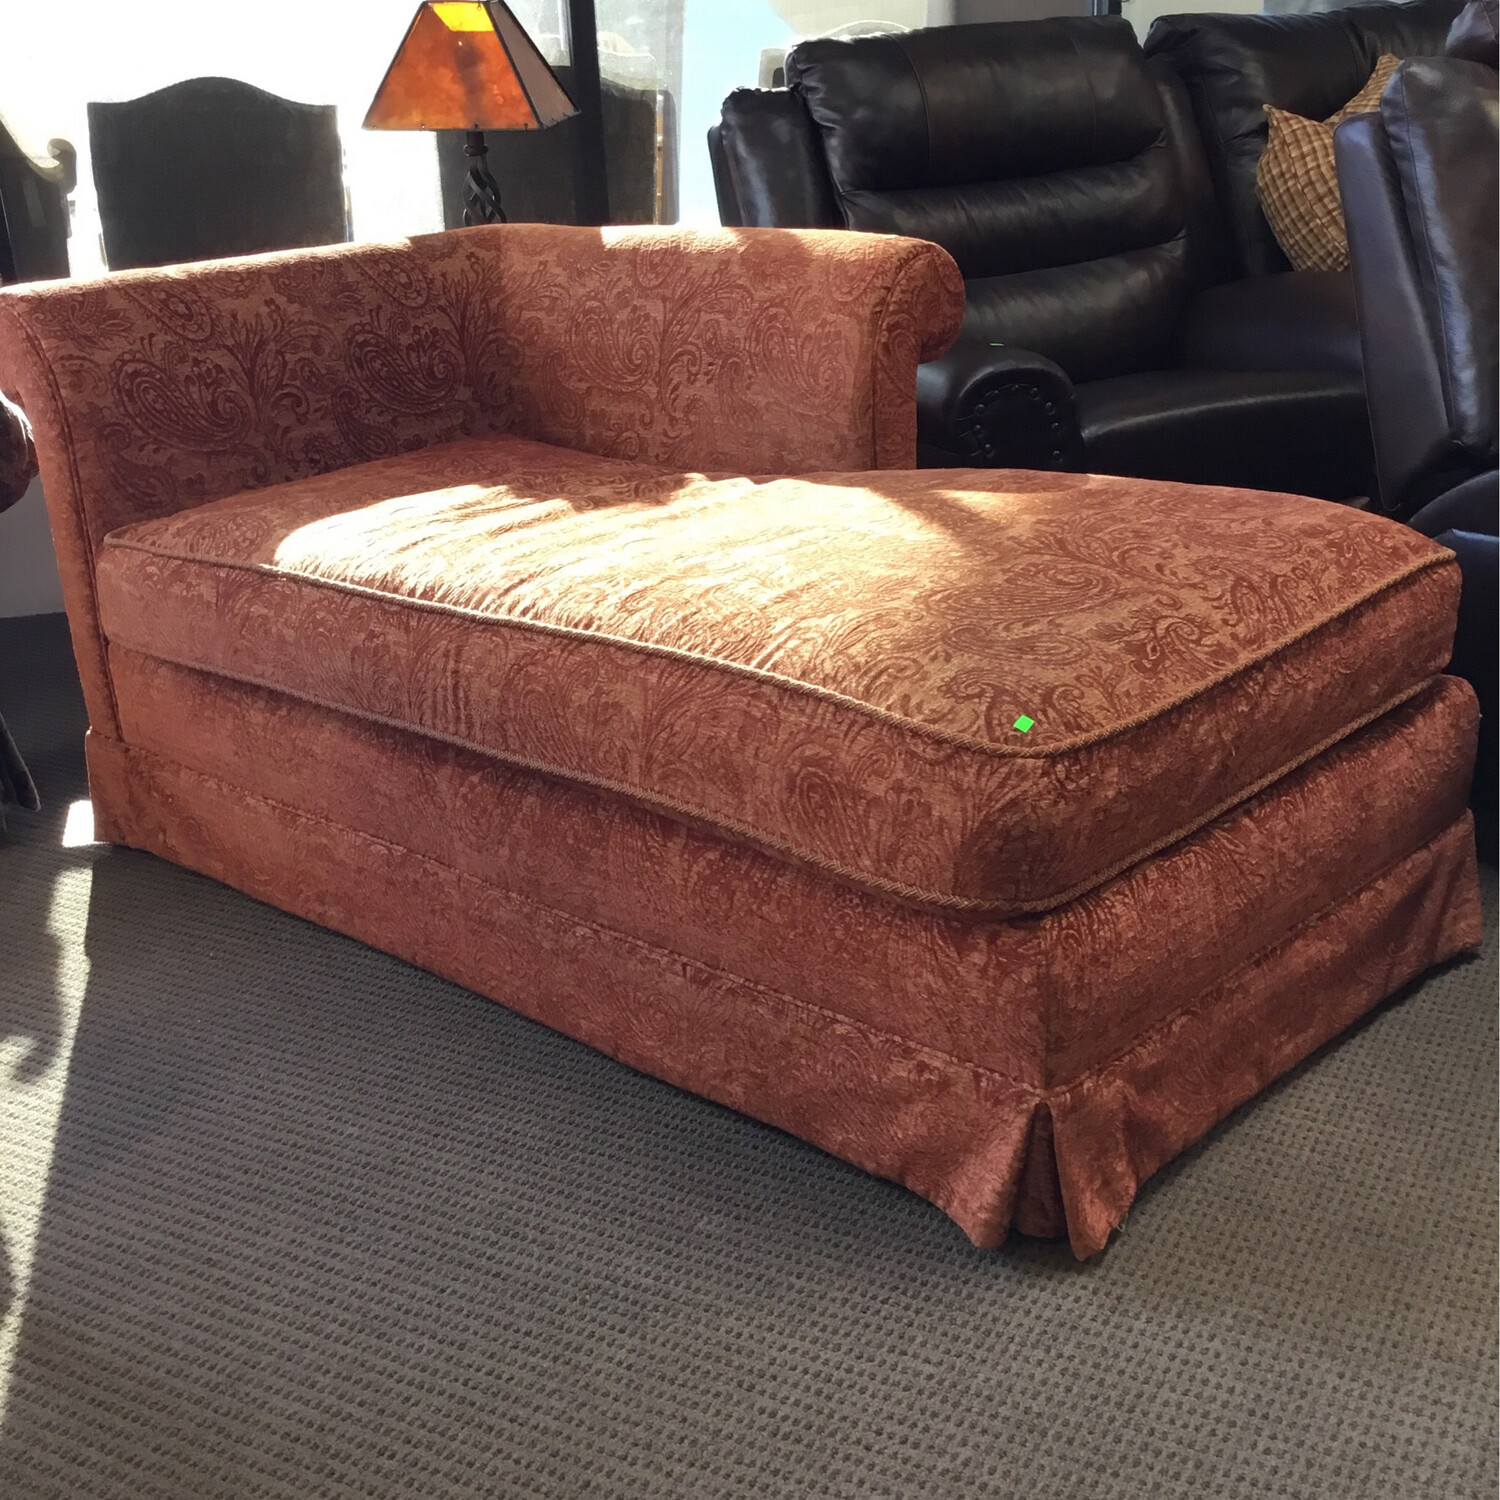 Rust Colored Paisley Chaise Lounge